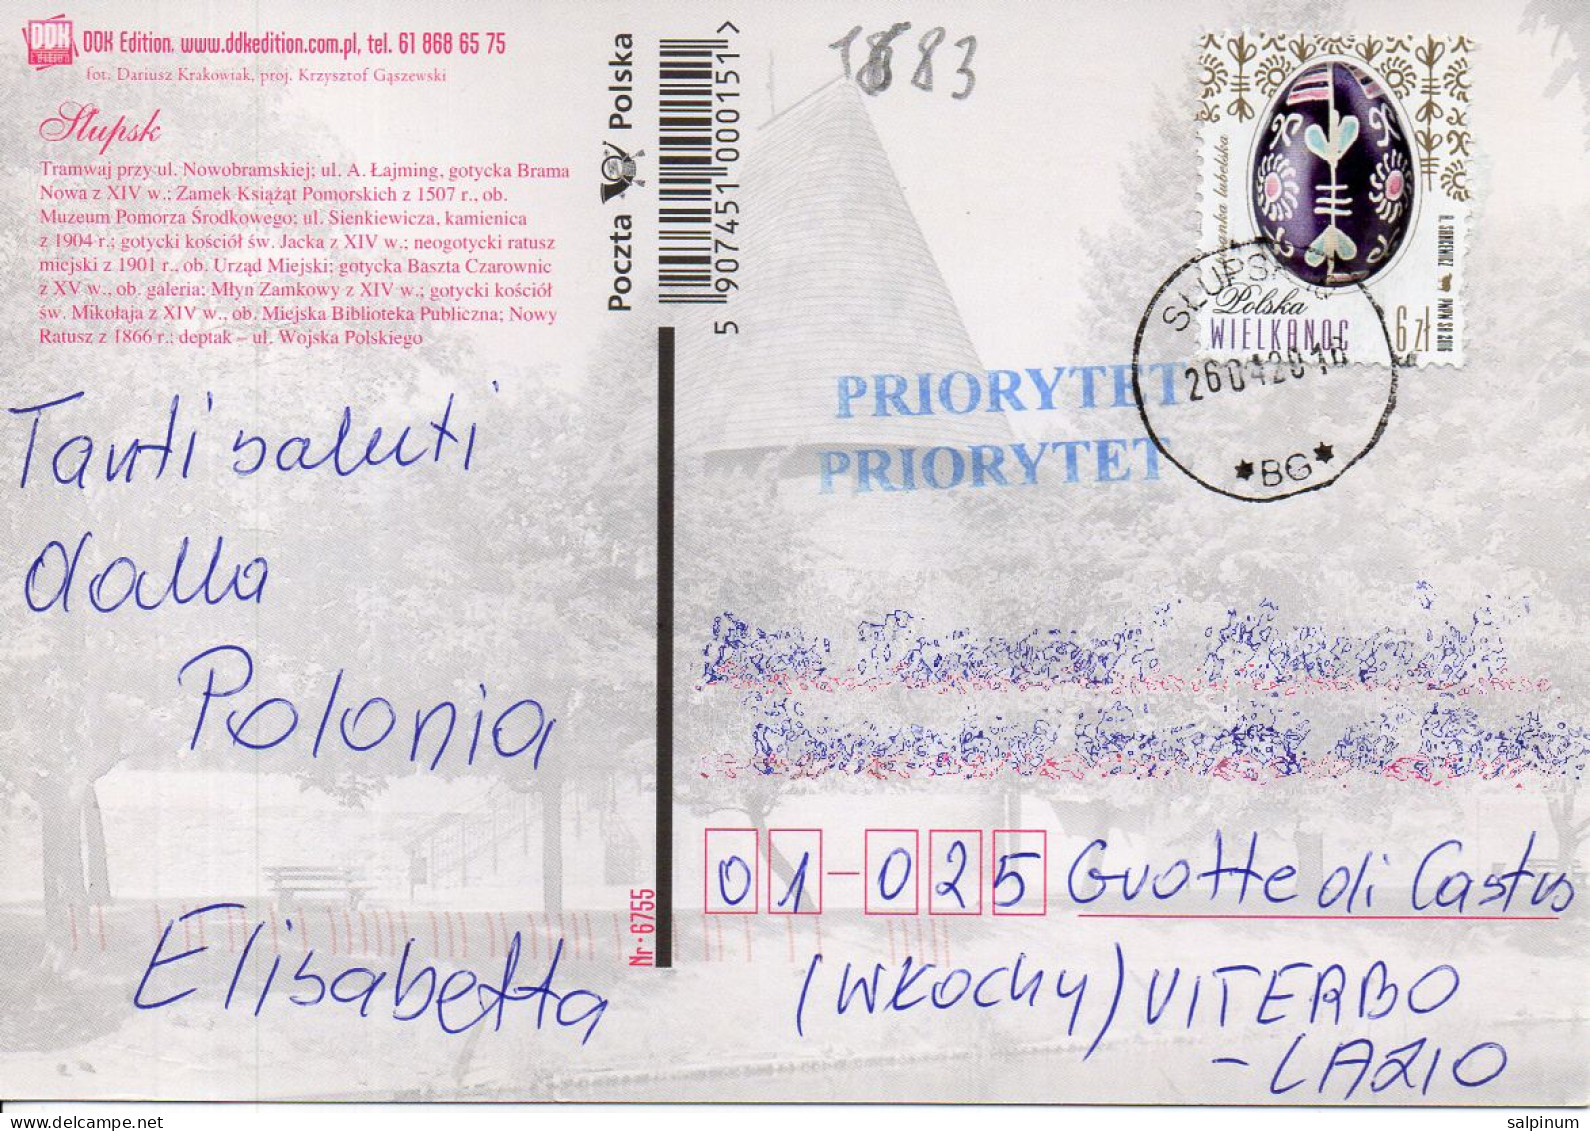 Philatelic Postcard With Stamps Sent From POLAND To ITALY - Briefe U. Dokumente